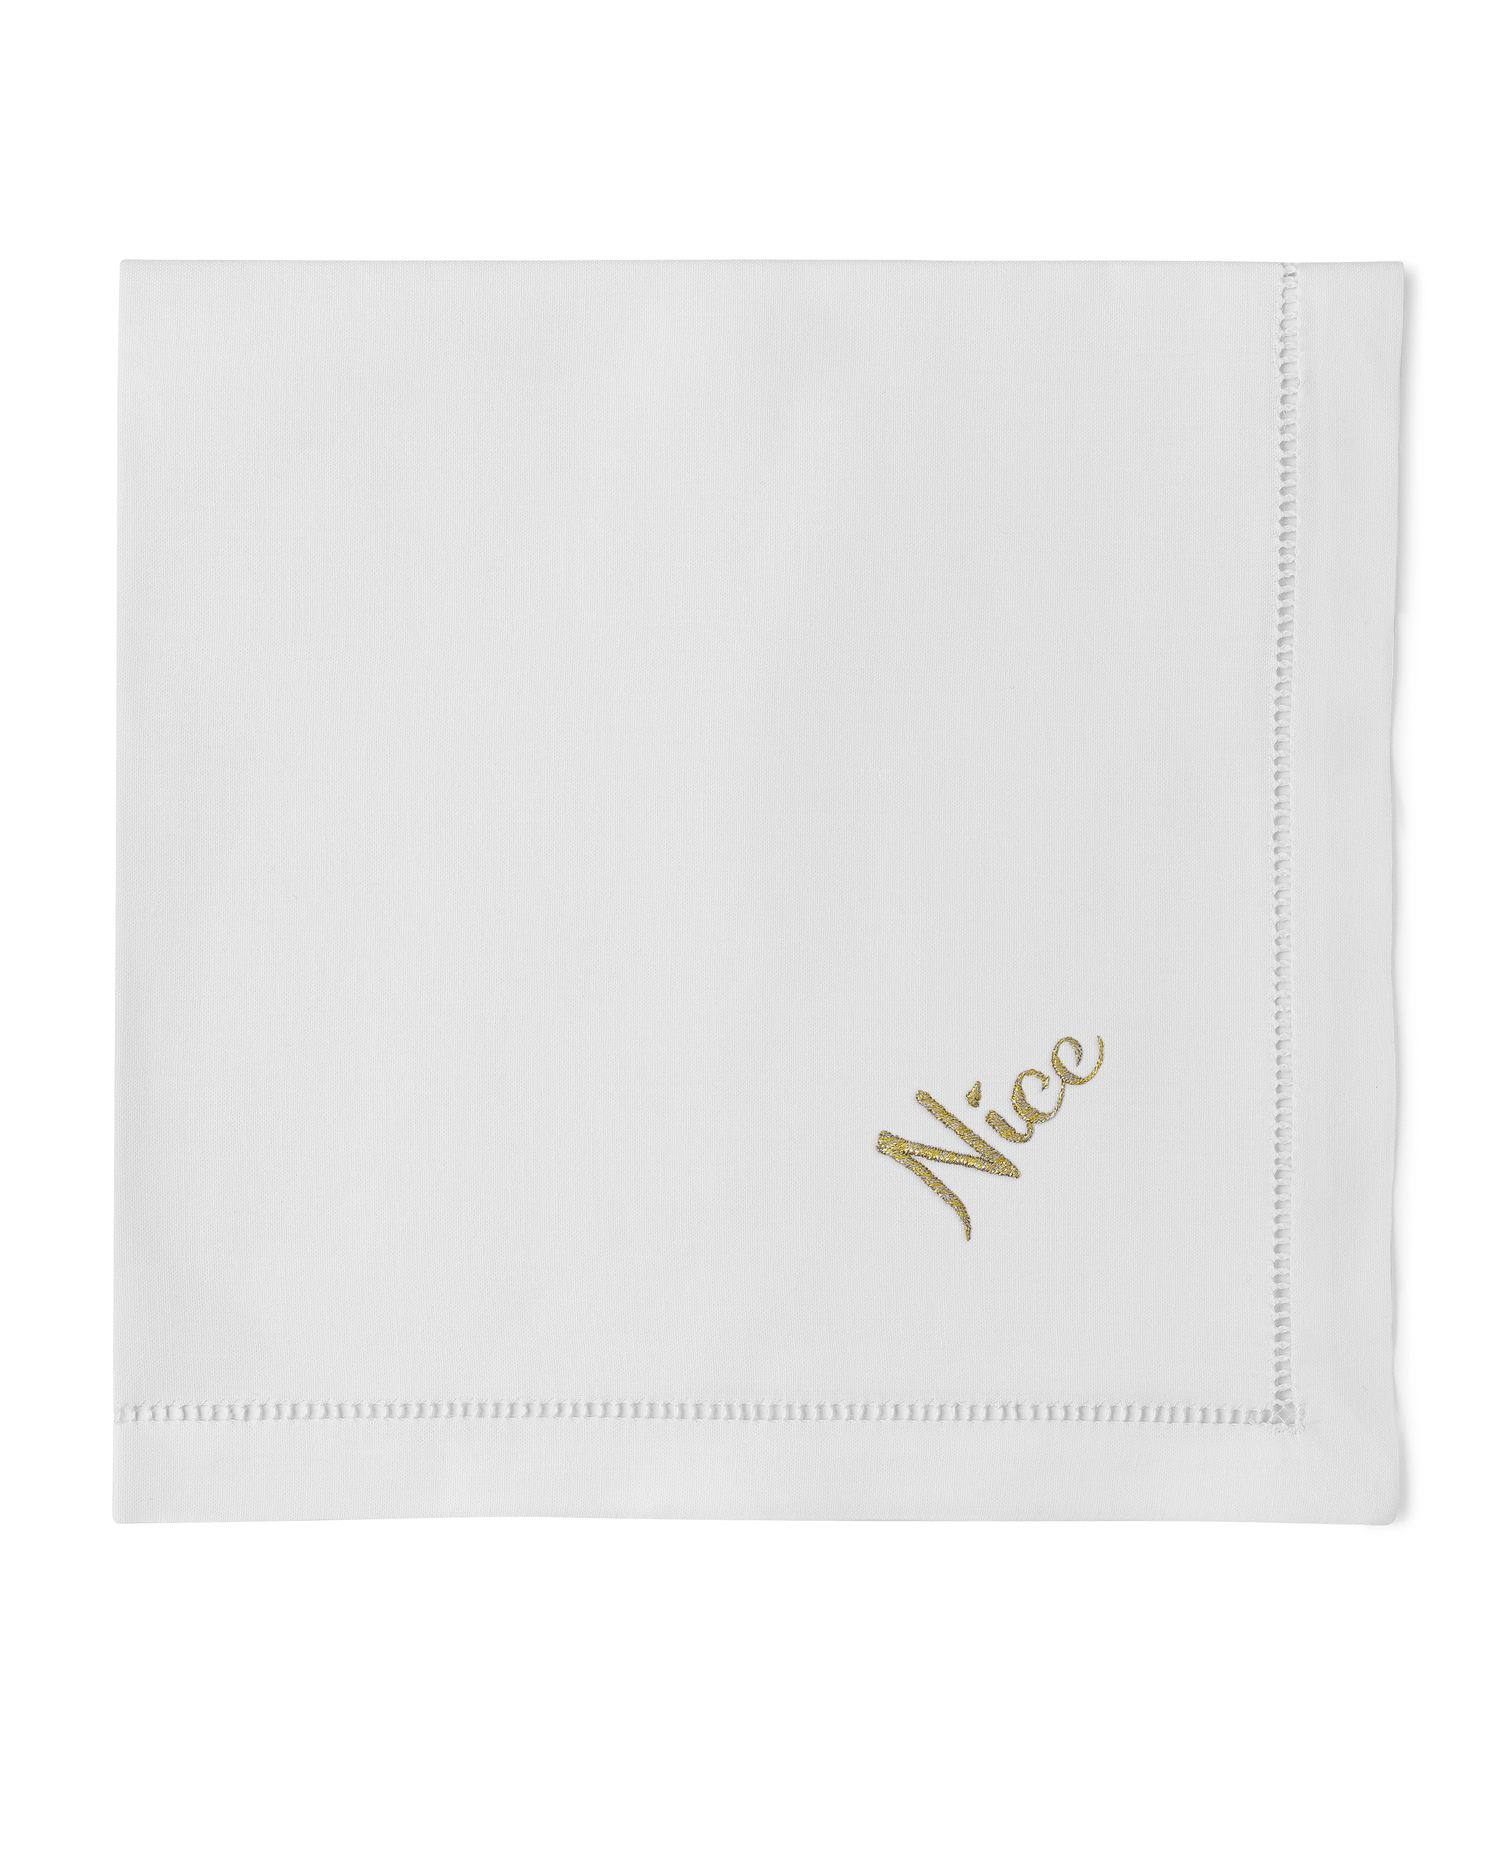 A white napkin with a hemstitch. The word “nice” in gold is embroidered in the bottom right corner